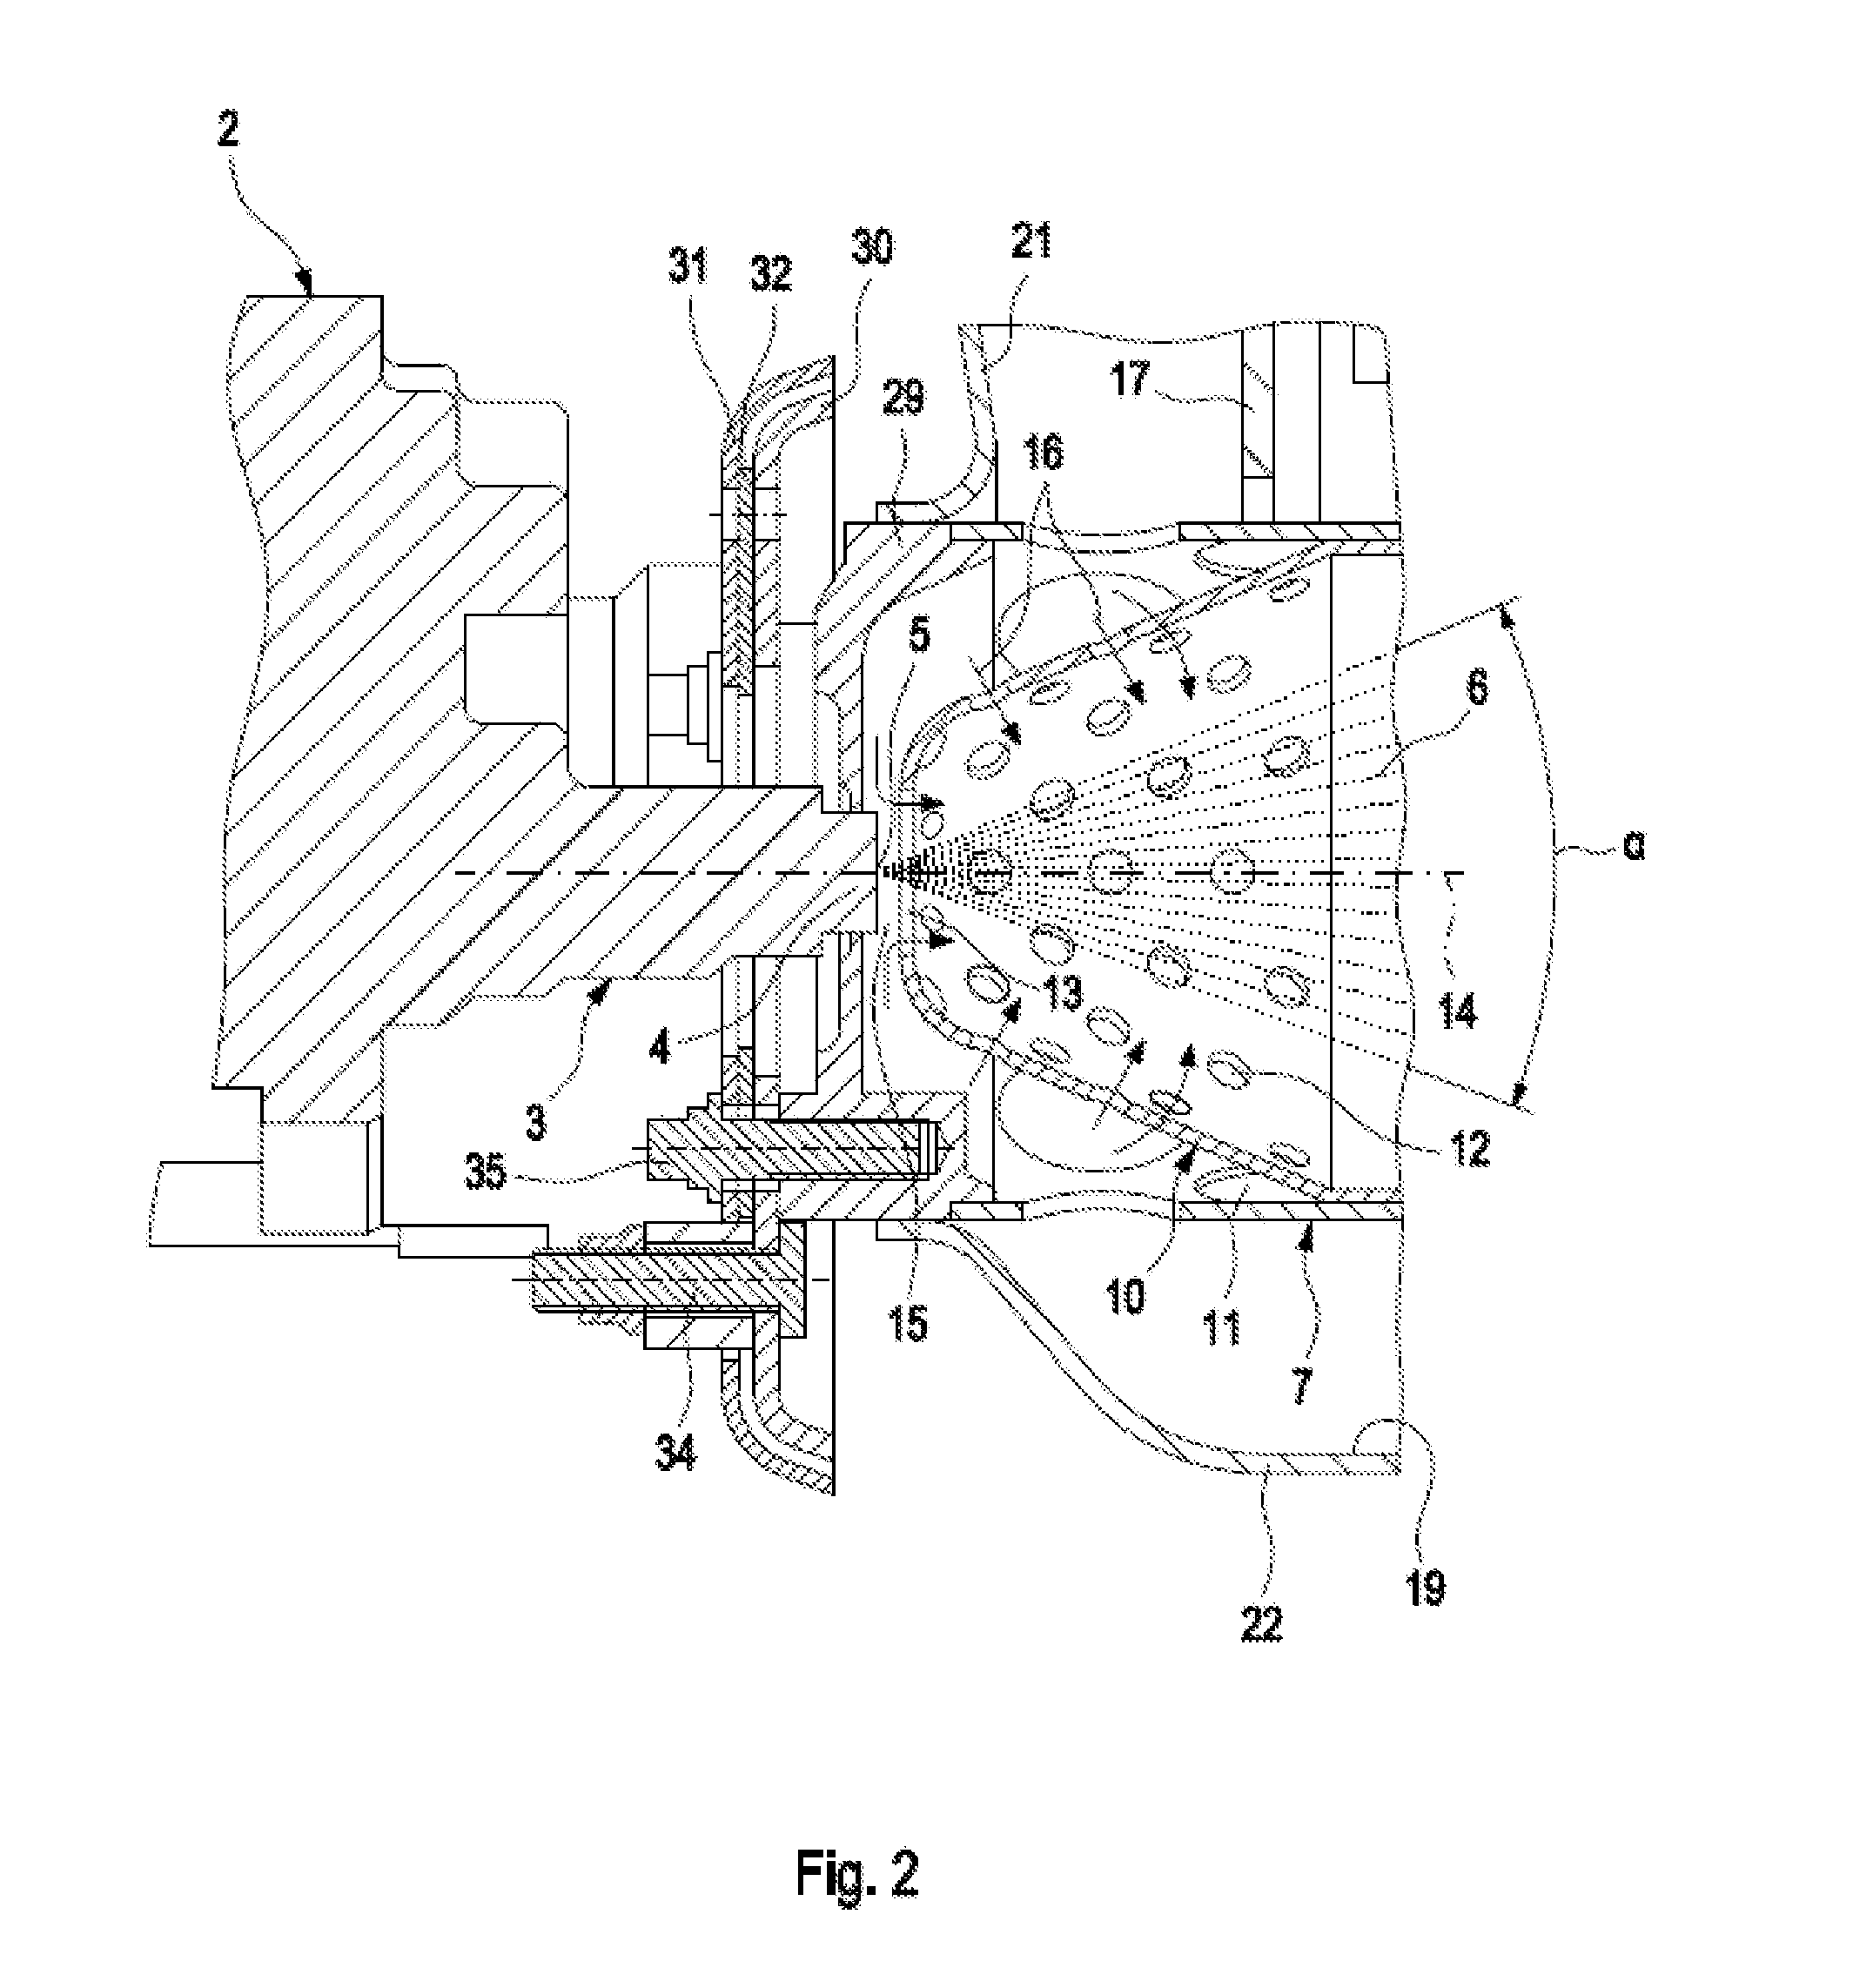 System for Adding and Processing Reducing Agent in a Motor Vehicle